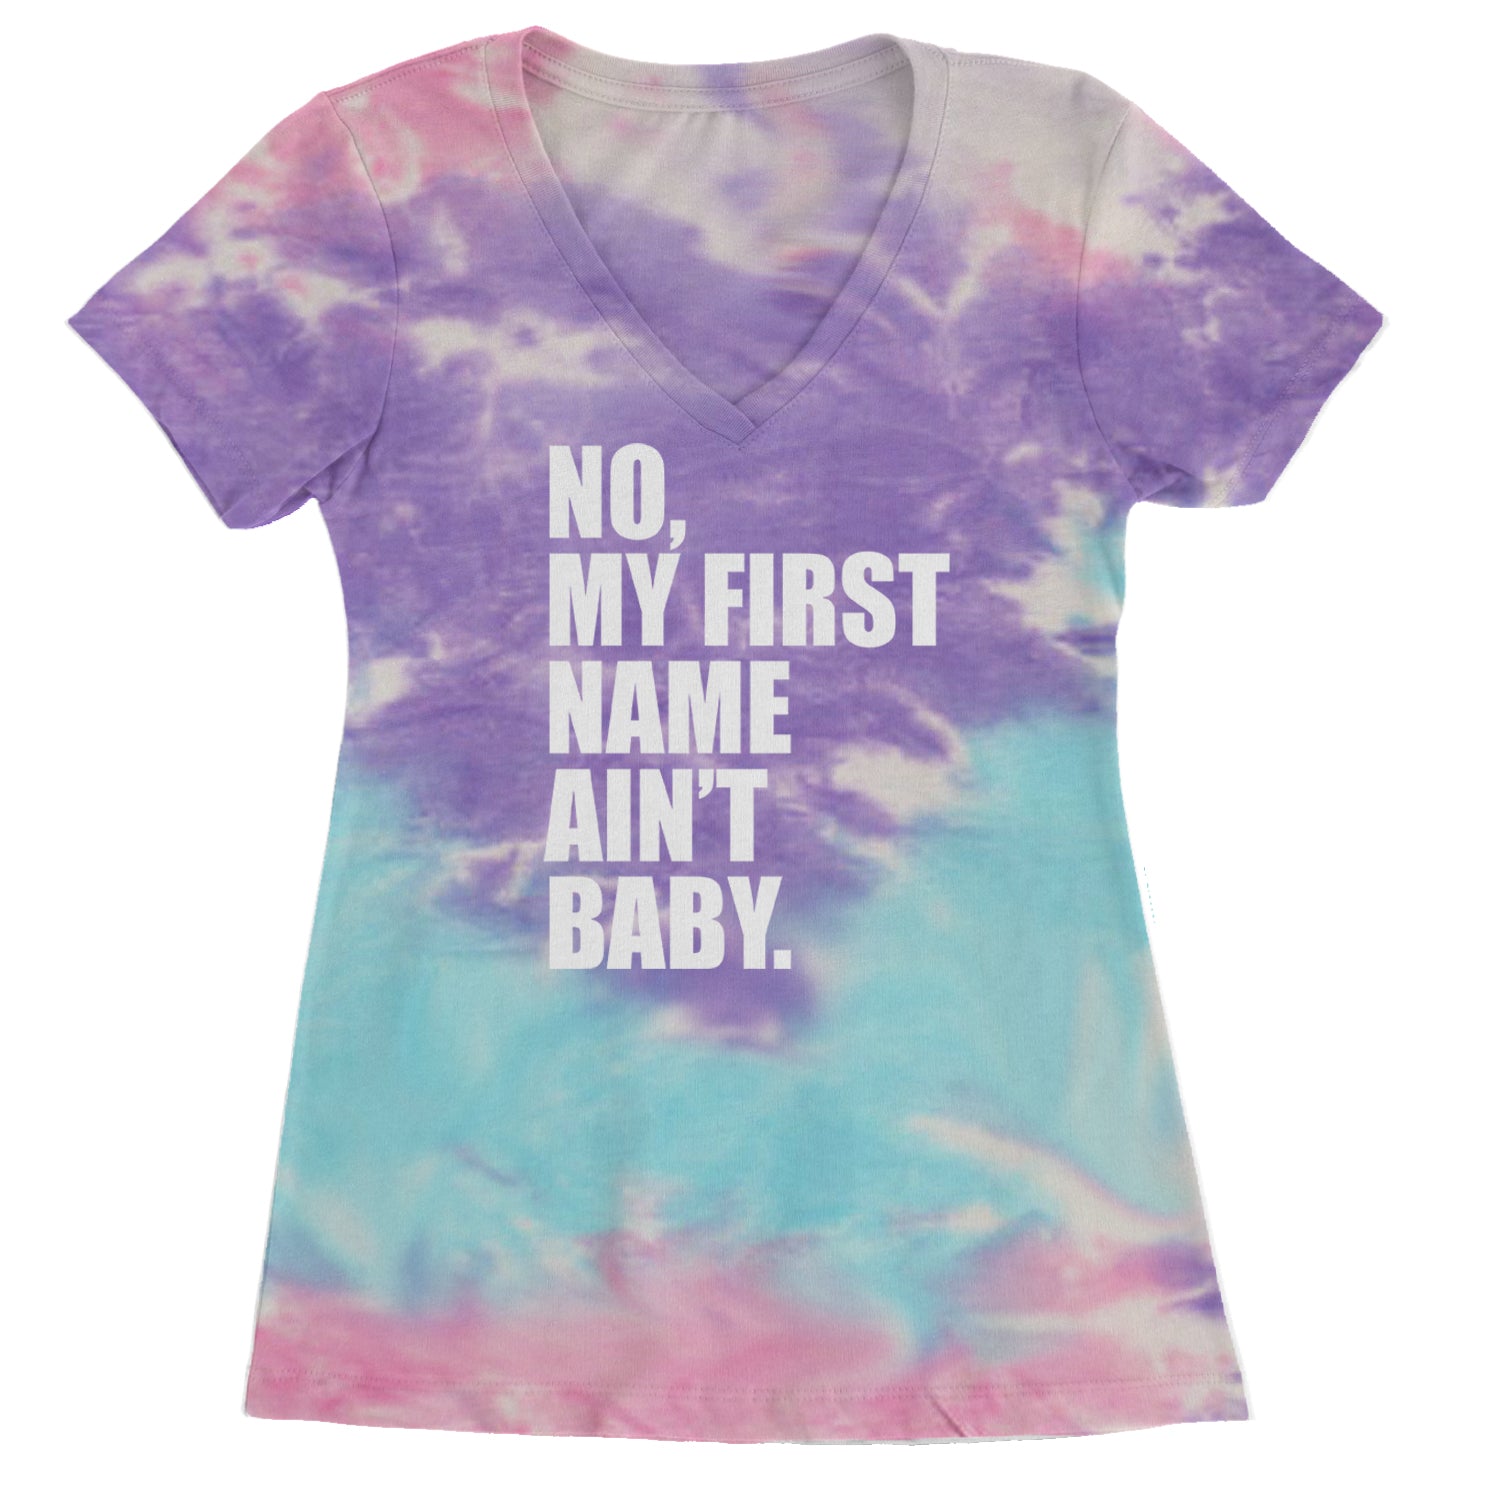 No My First Name Ain't Baby Together Again Ladies V-Neck T-shirt Cotton Candy